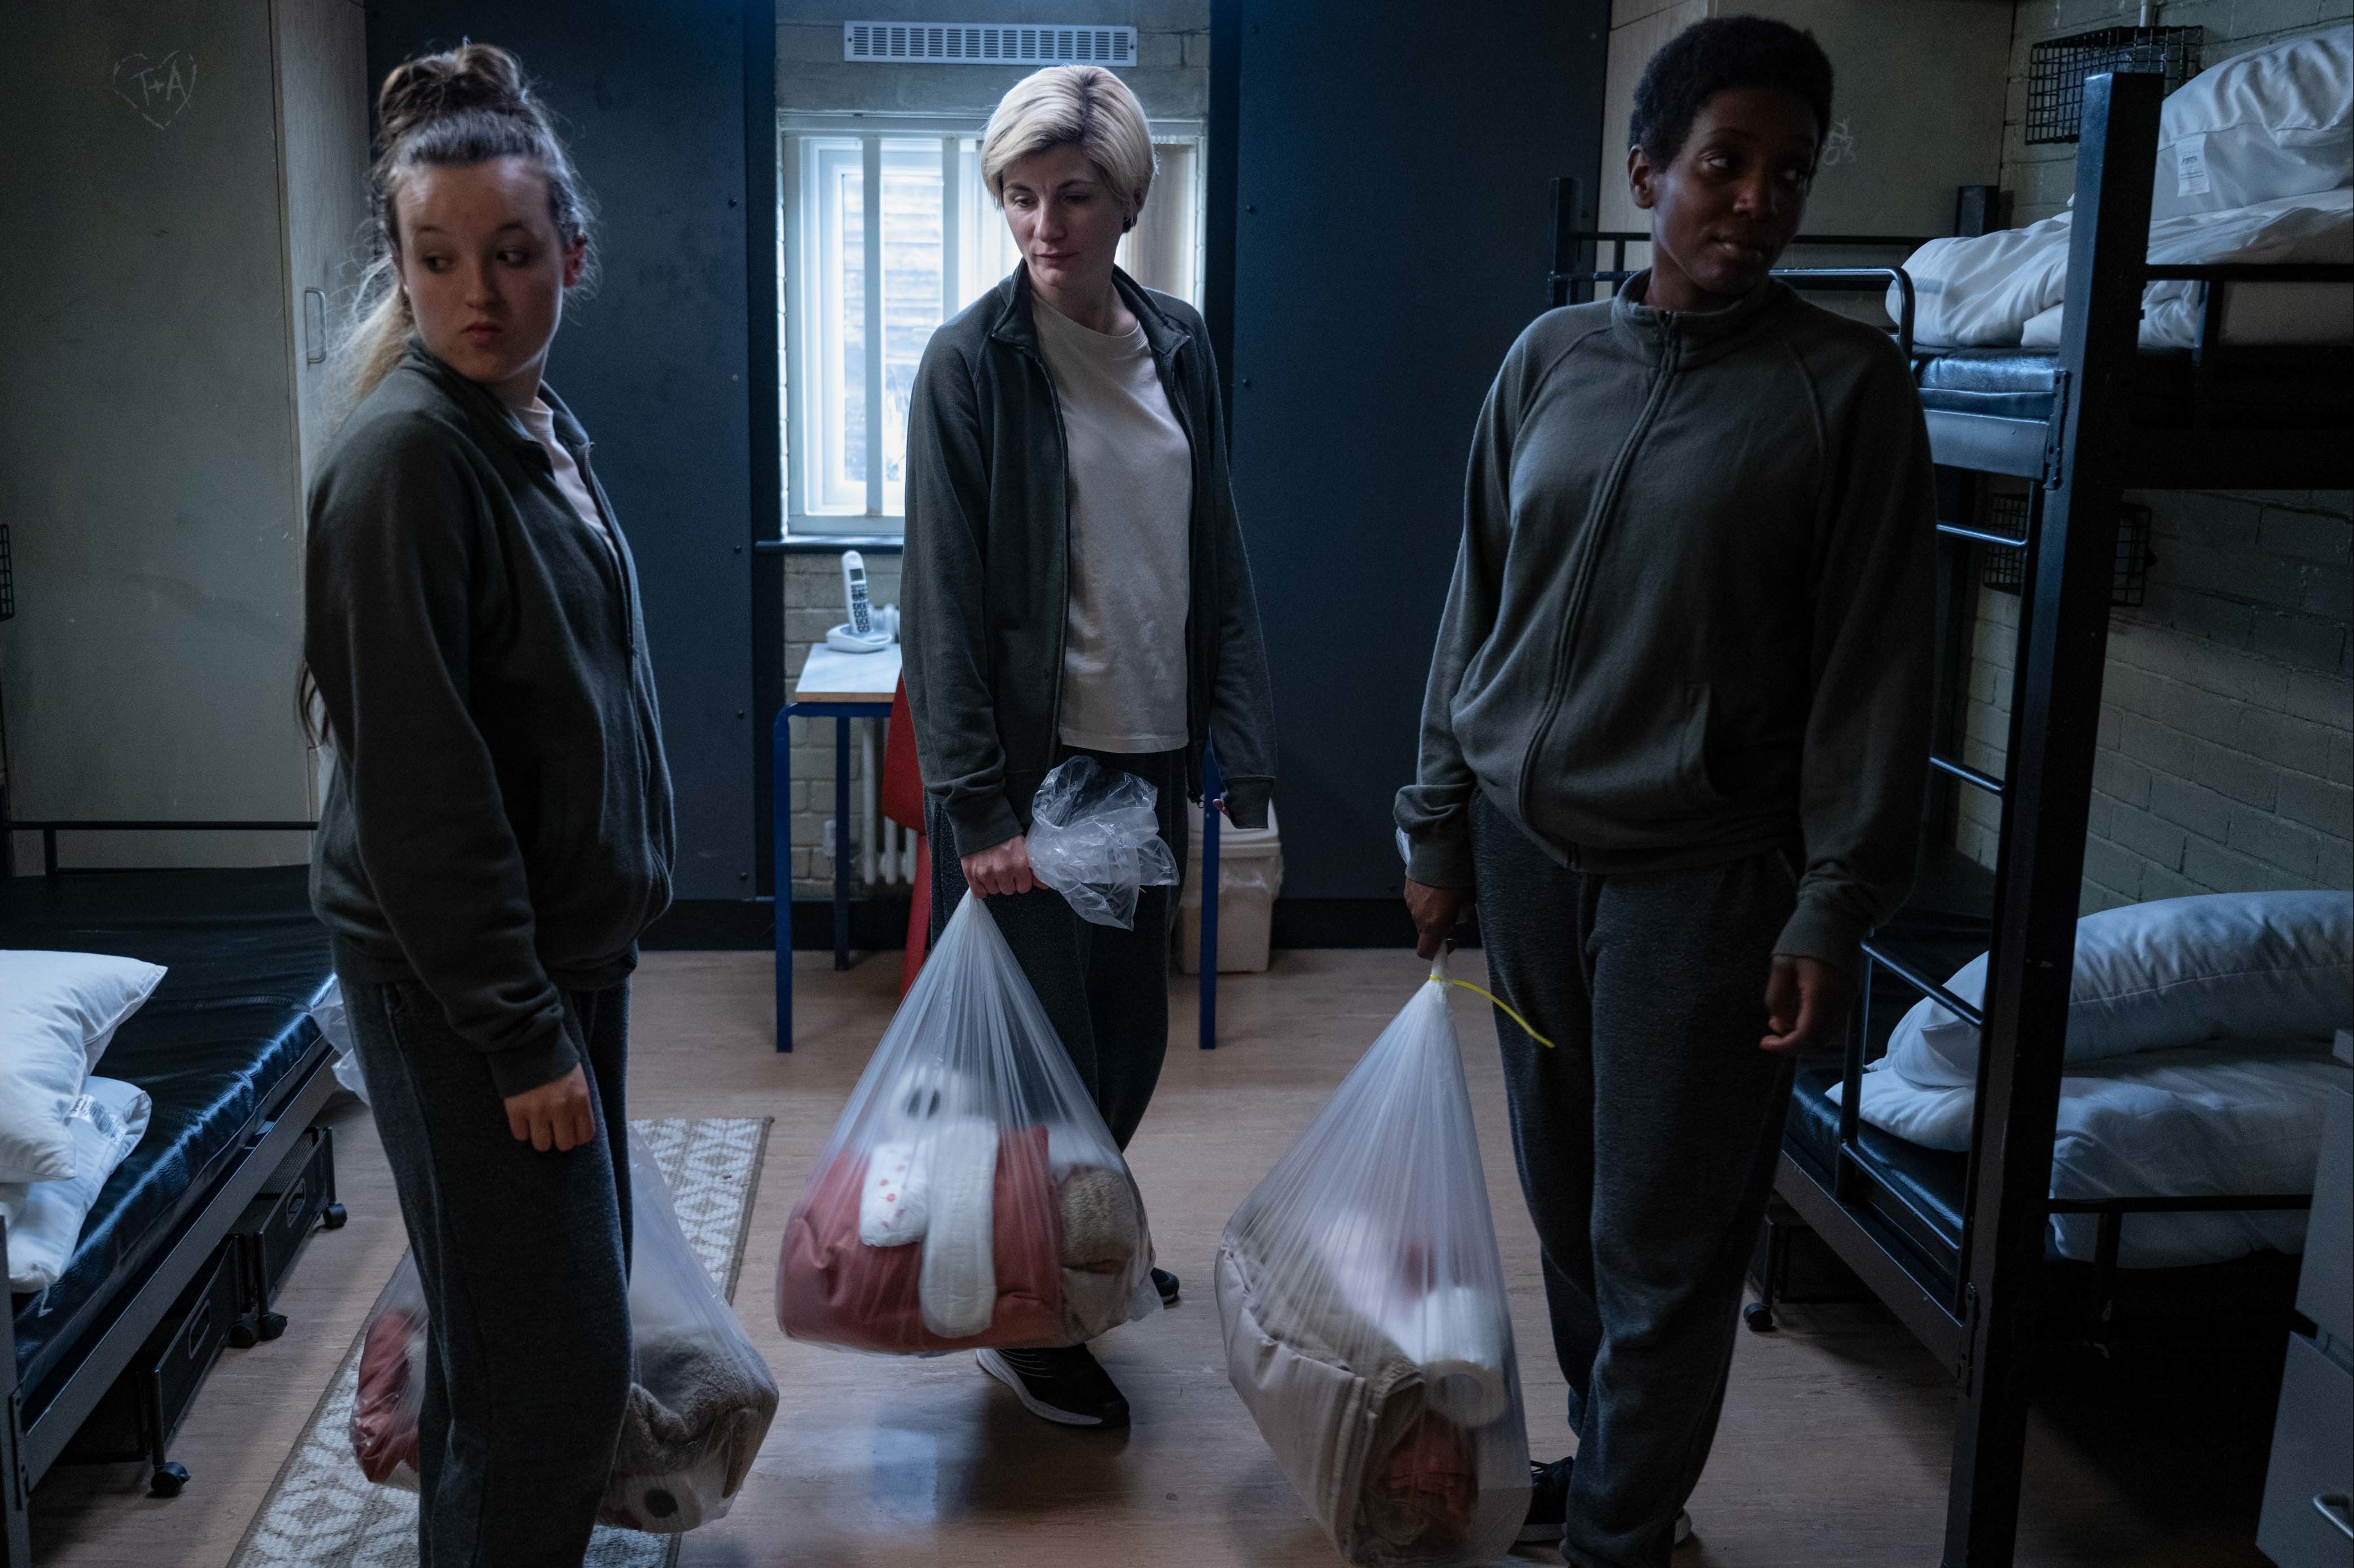 BBC prison drama Time shows the stark differences for female and